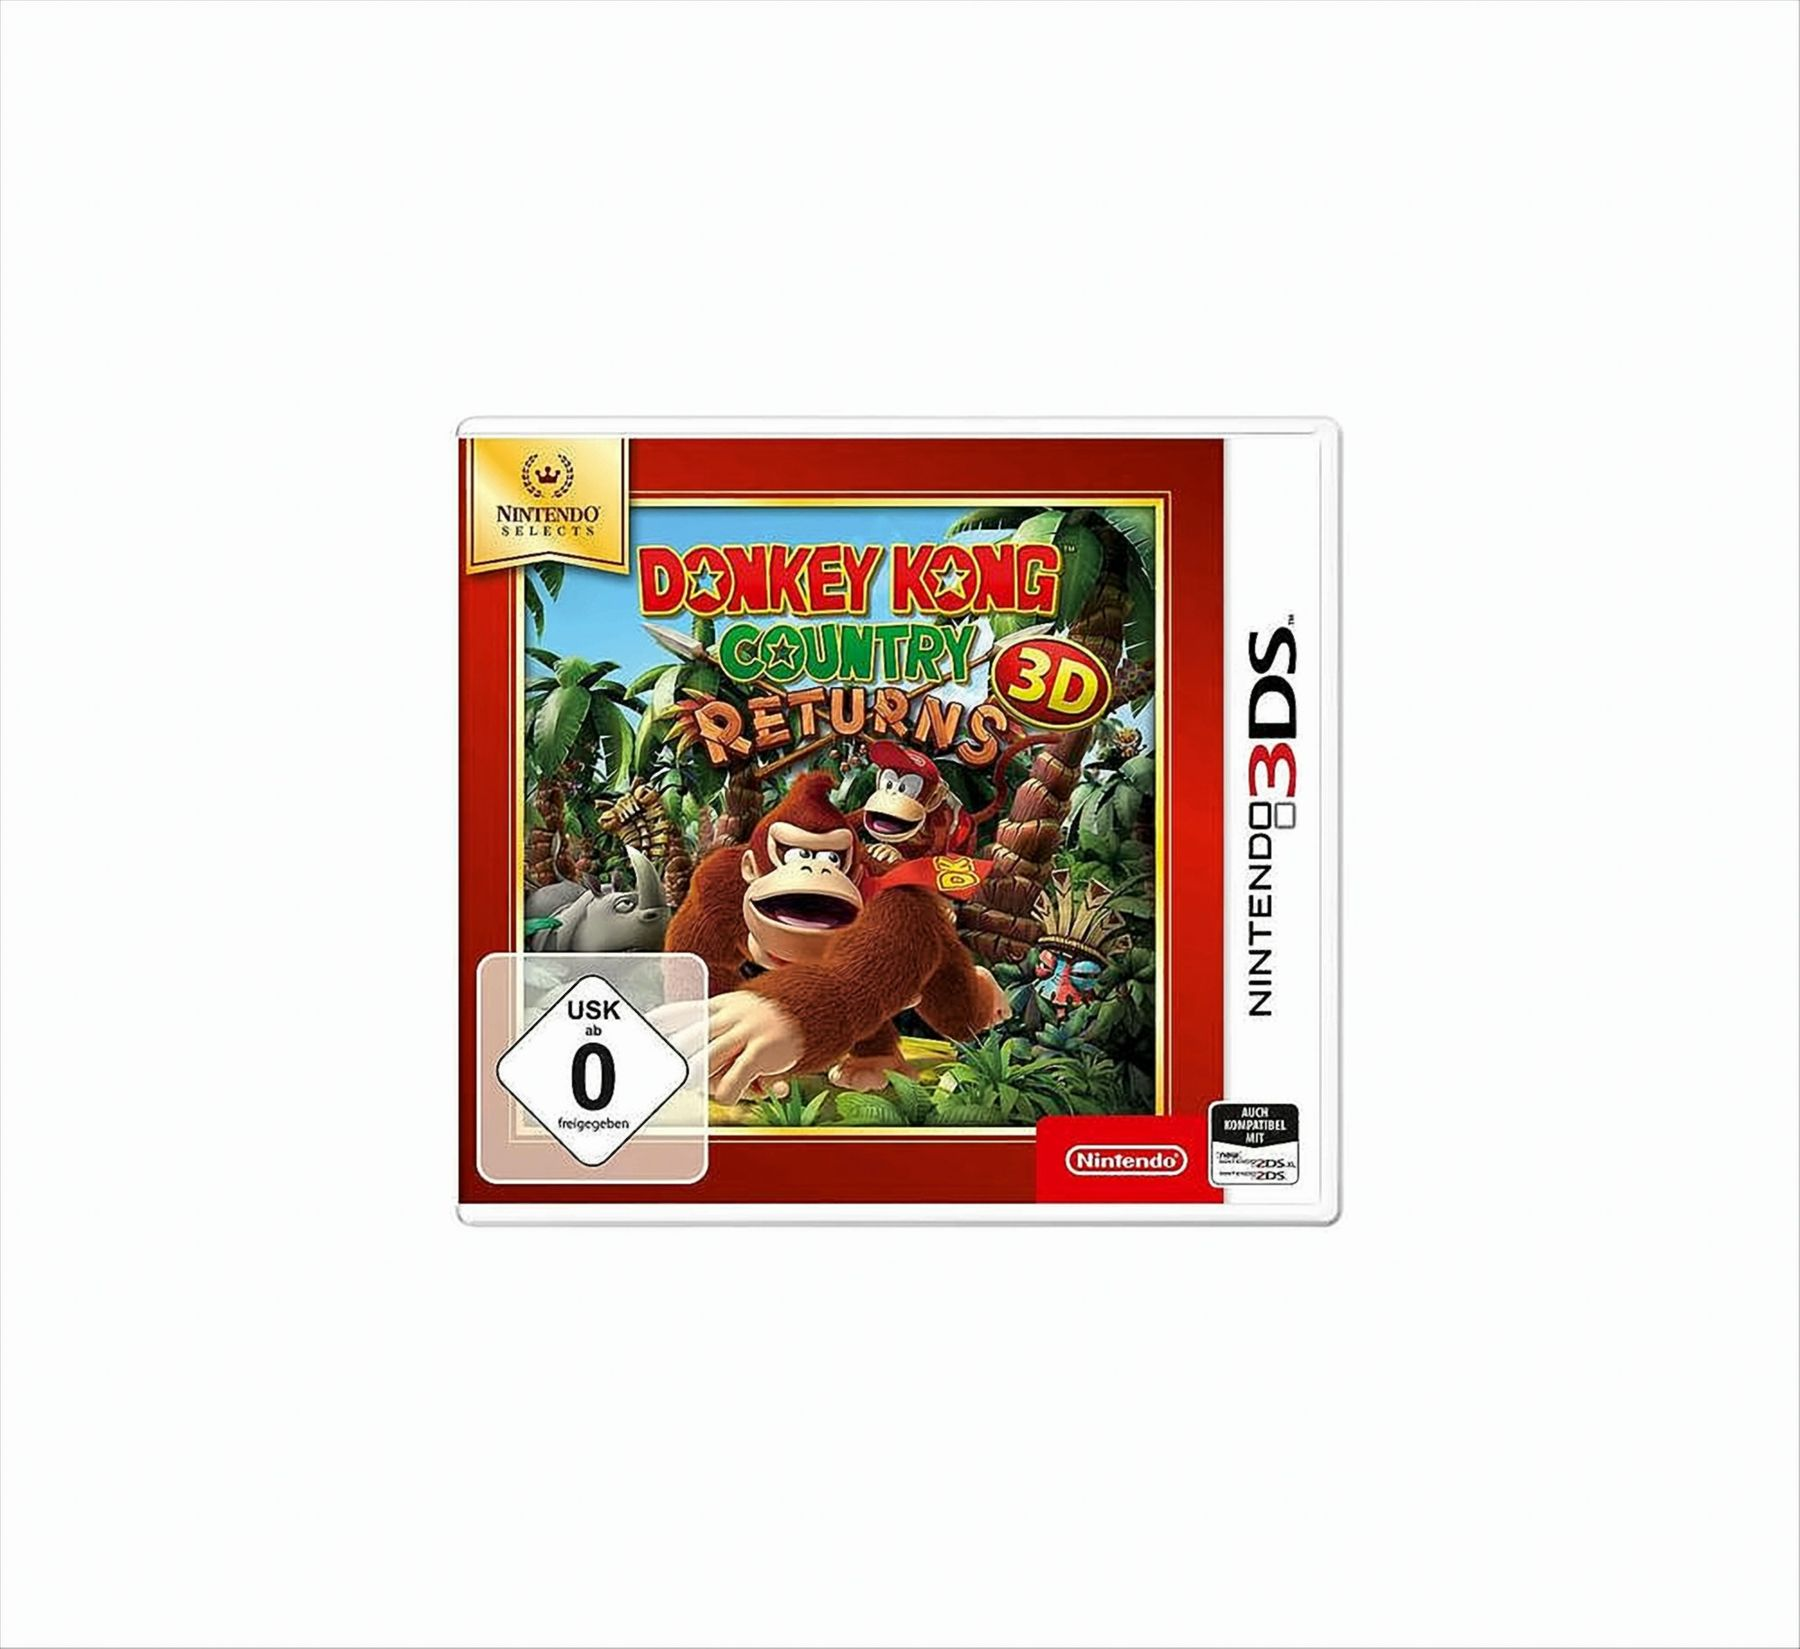 Donkey Kong Country - Returns 3D 3DS TS [Nintendo SELEC 3DS